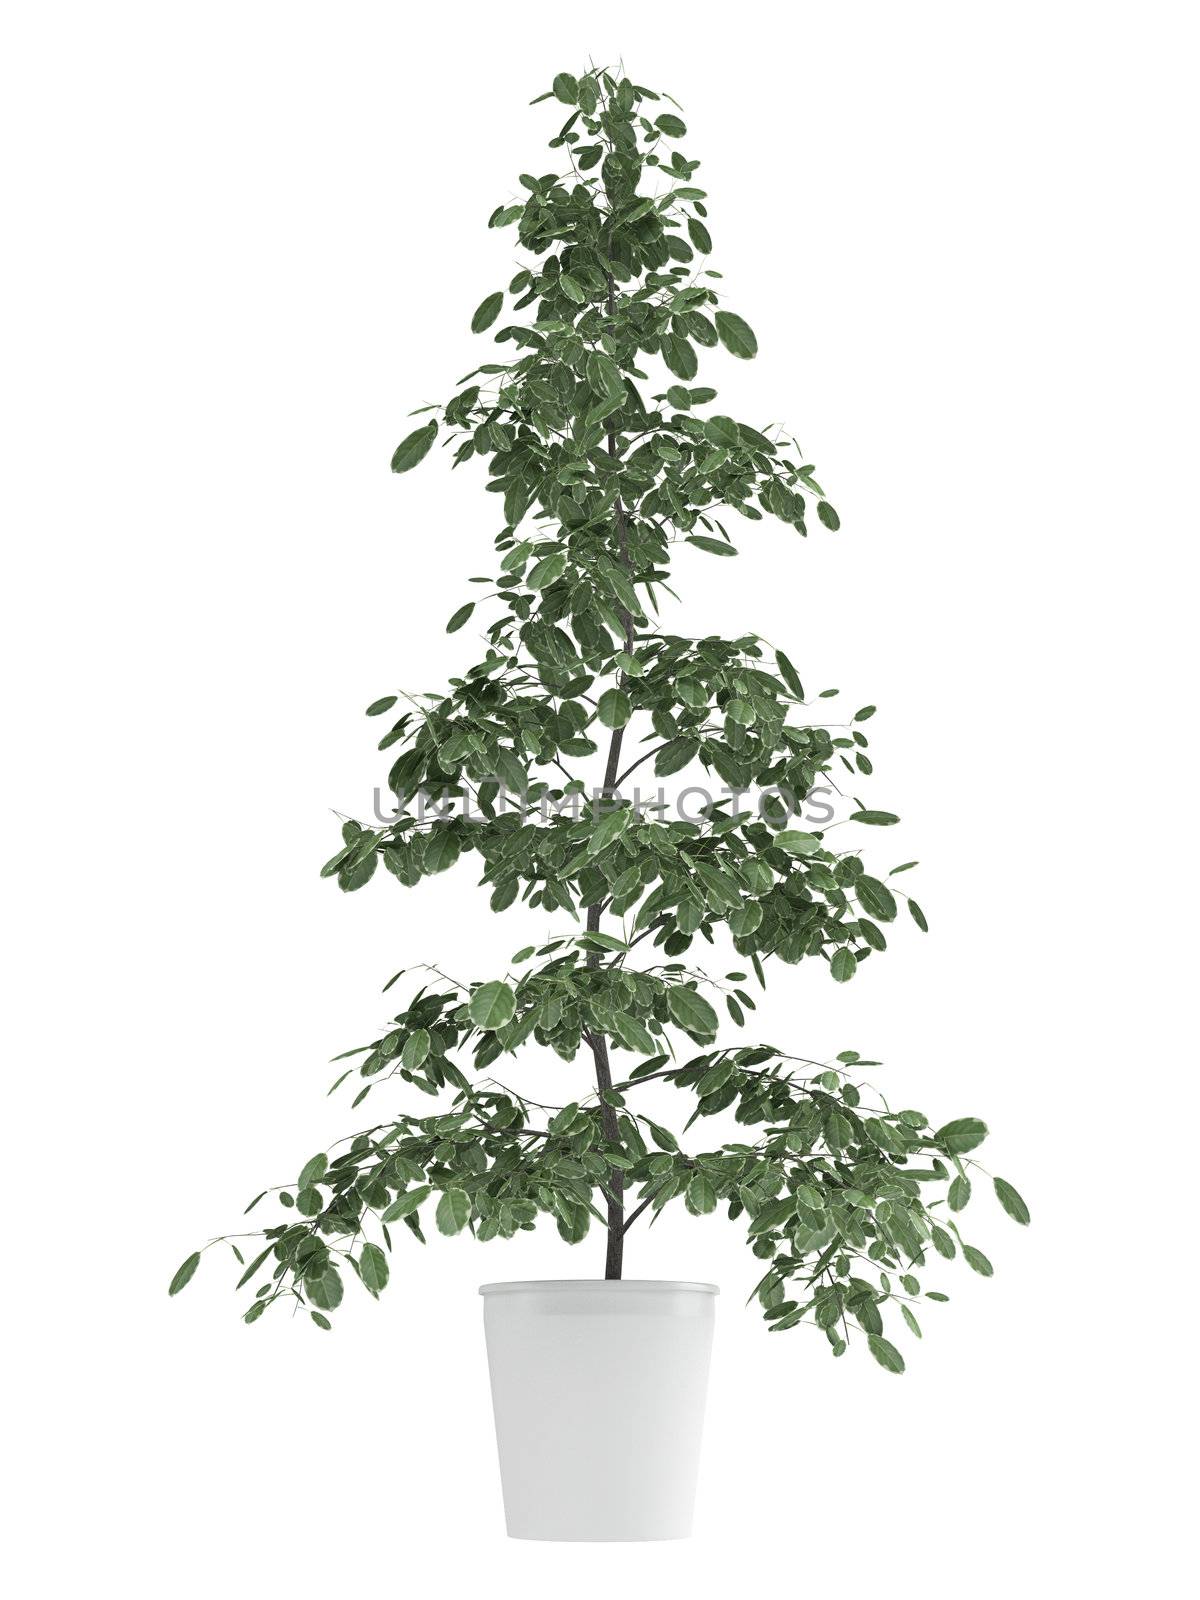 Tall ficus, or fig, growing in a white container as an ornamental houseplant isolated on white